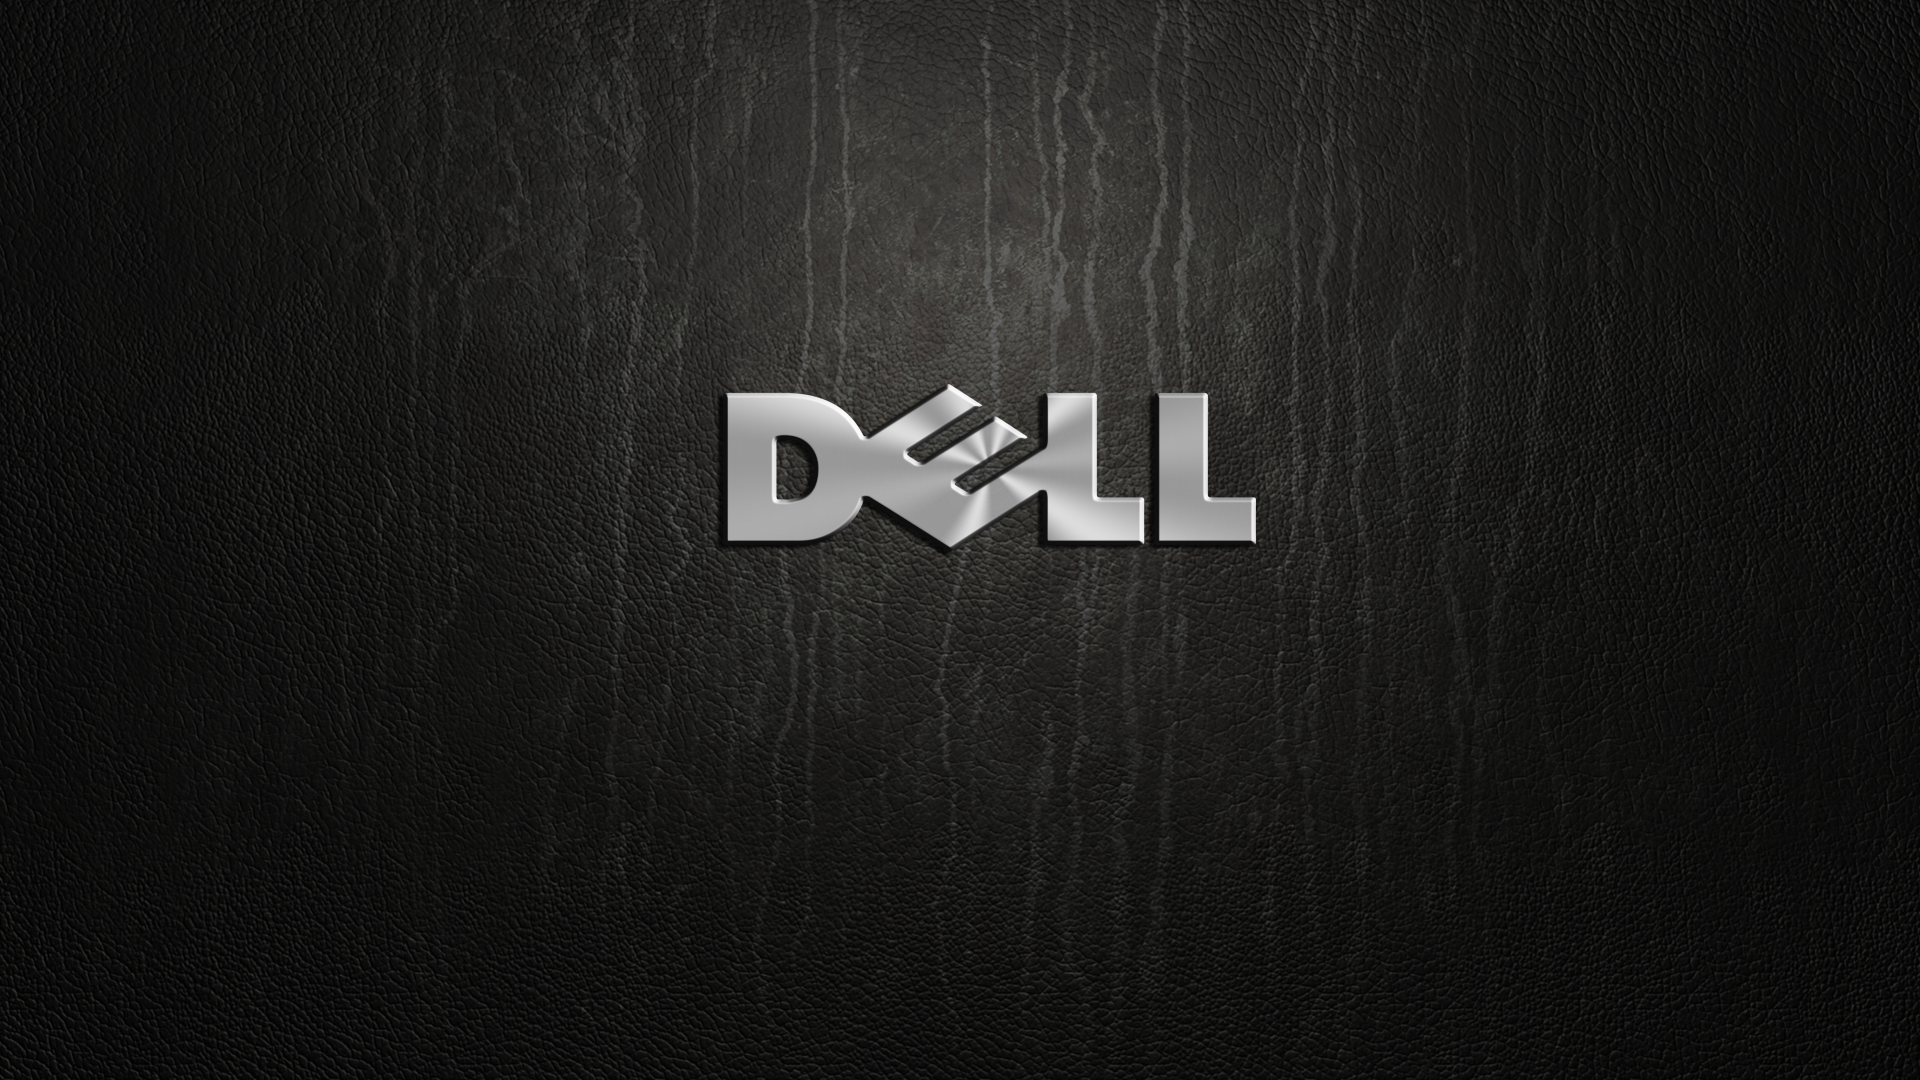 Download Technology Dell  HD Wallpaper